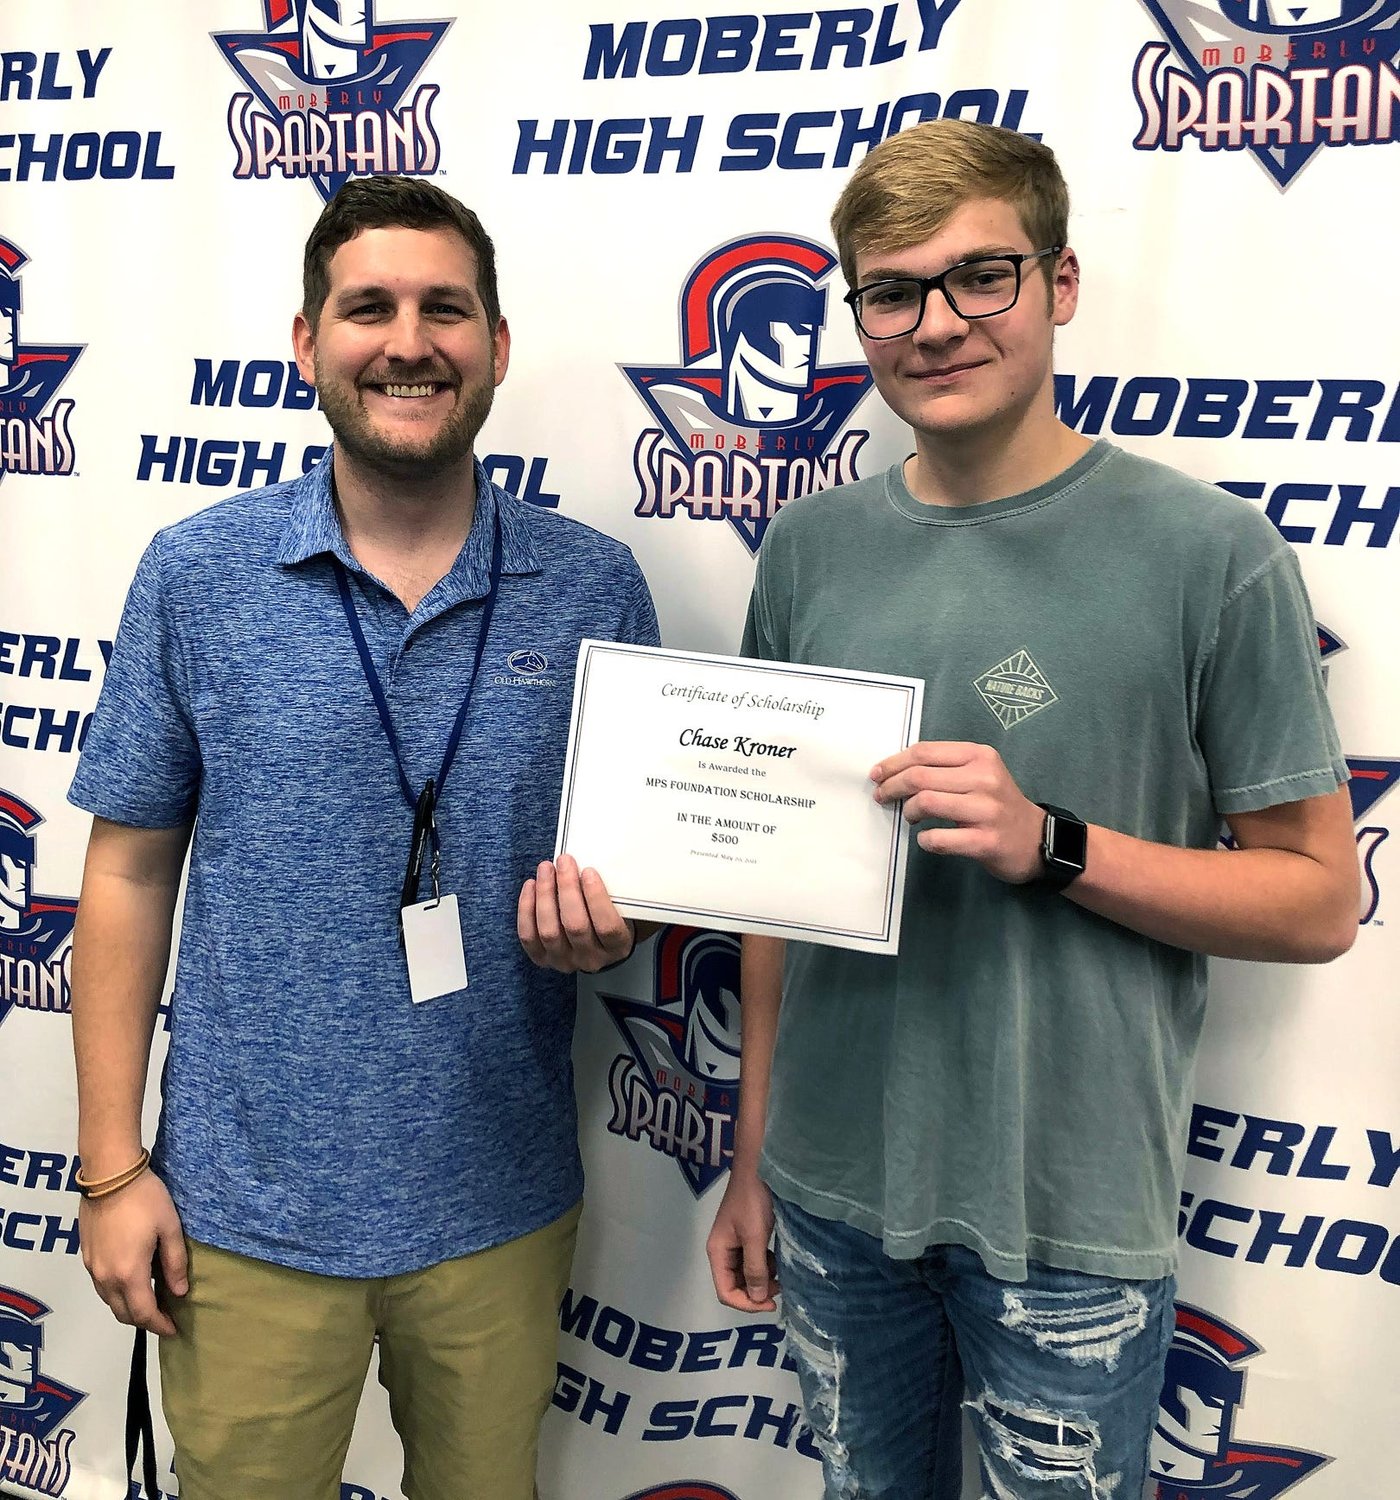 Moberly High School senior Chase Kroner received a Moberly Public Schools Foundation $500 college scholarship two weeks ago that was presented by MHS College and Career Readiness Coordinator William Beaudoin, left.